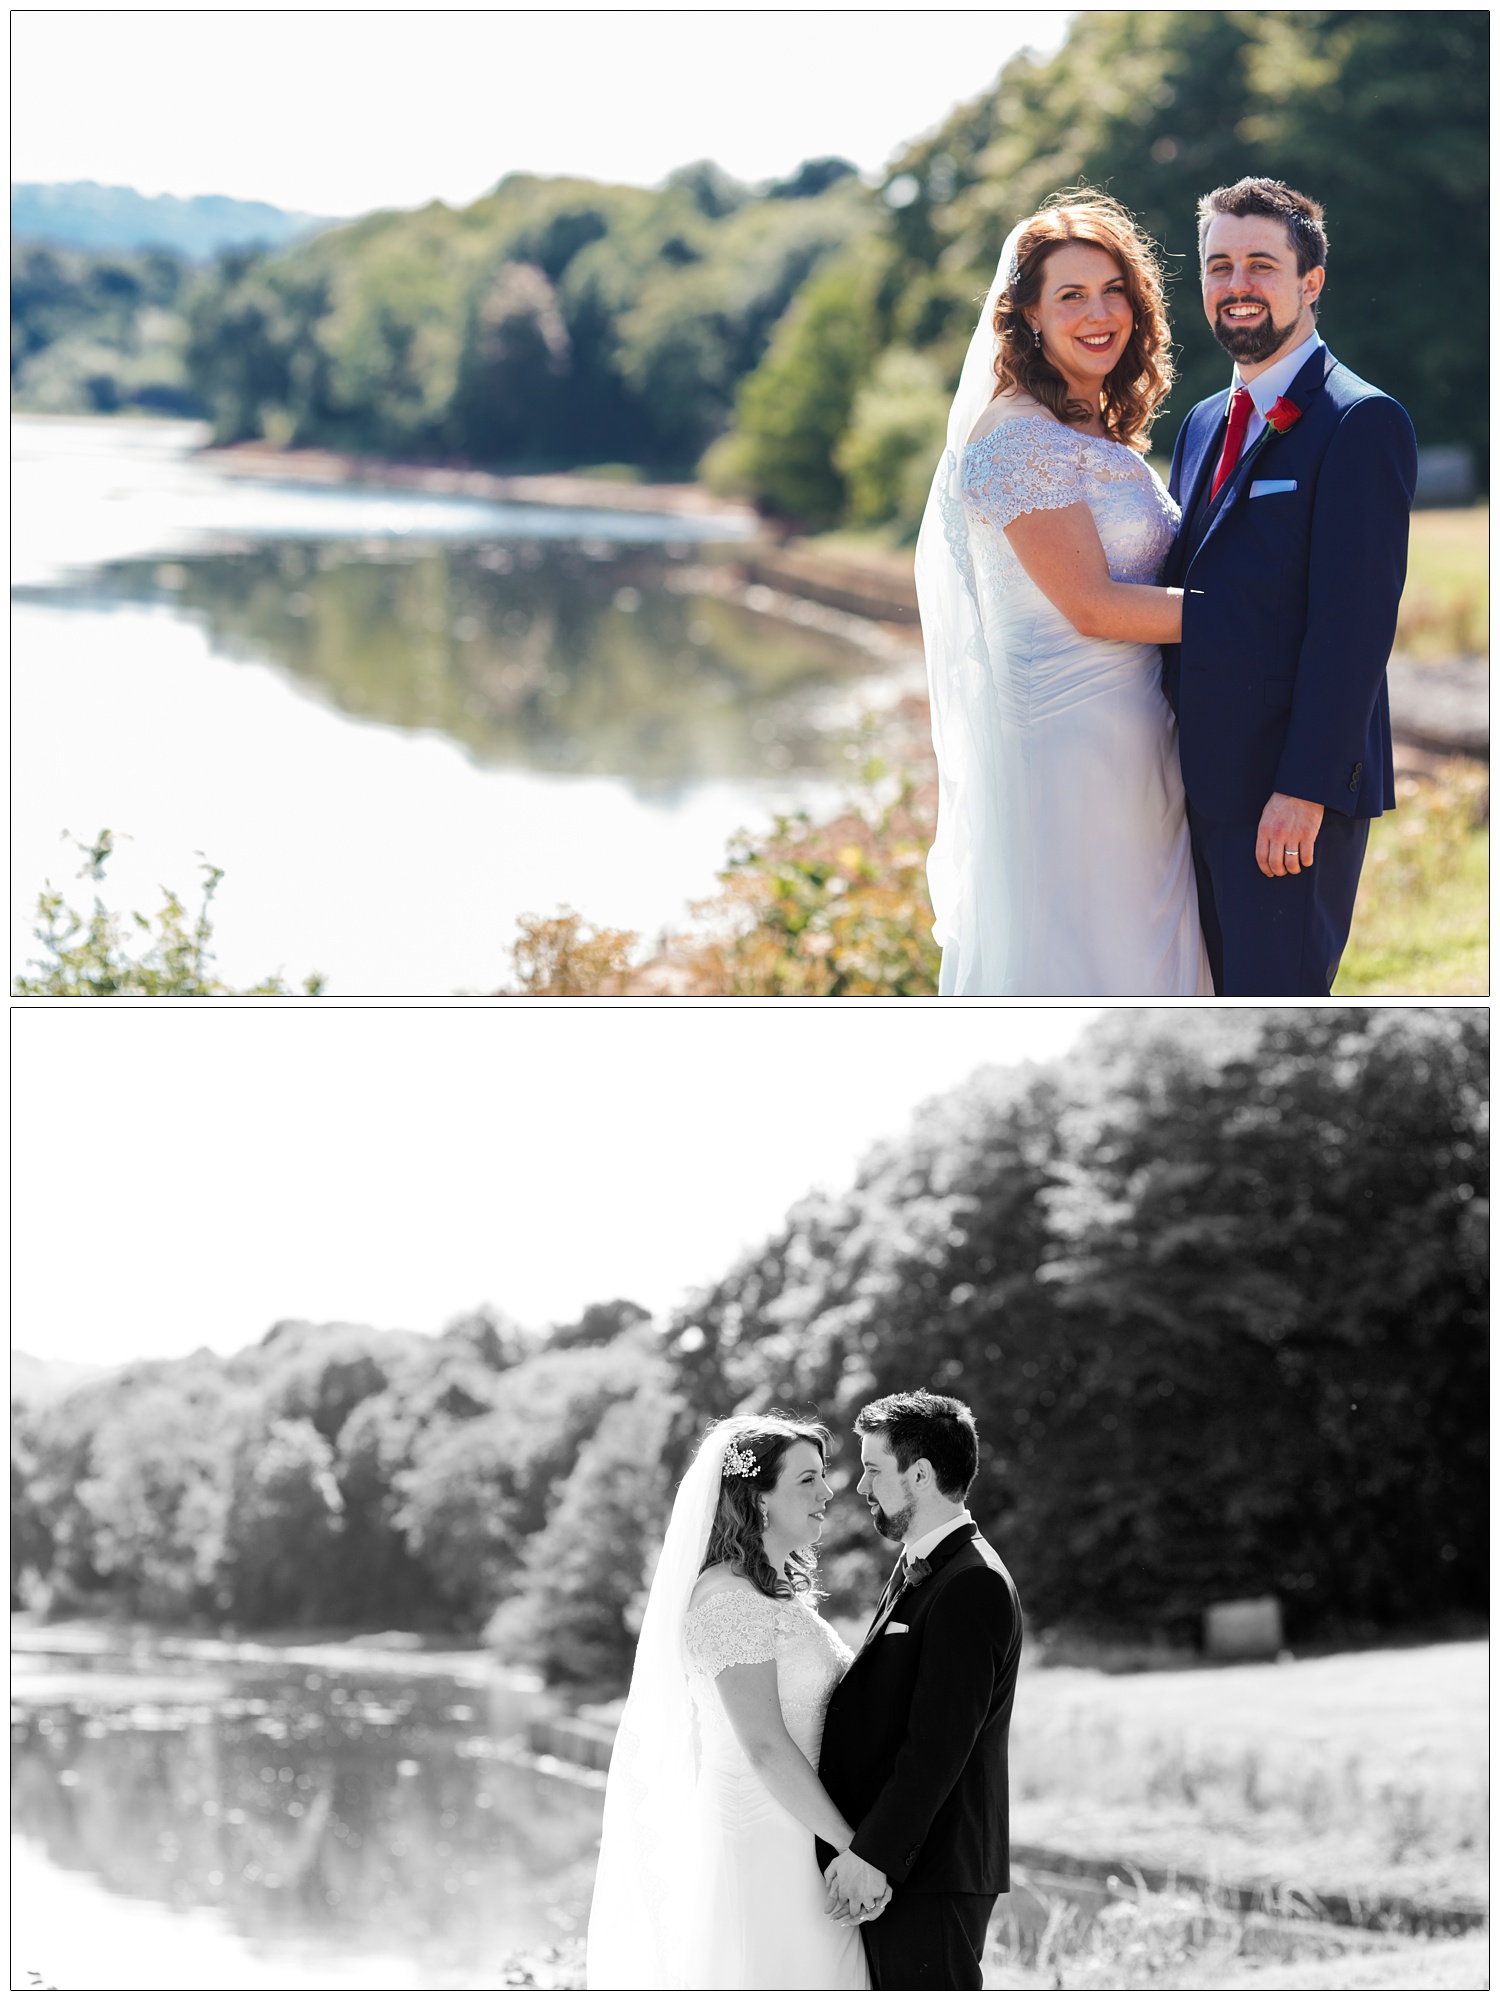 A newly married couple posing by the Chew Valley Lake.